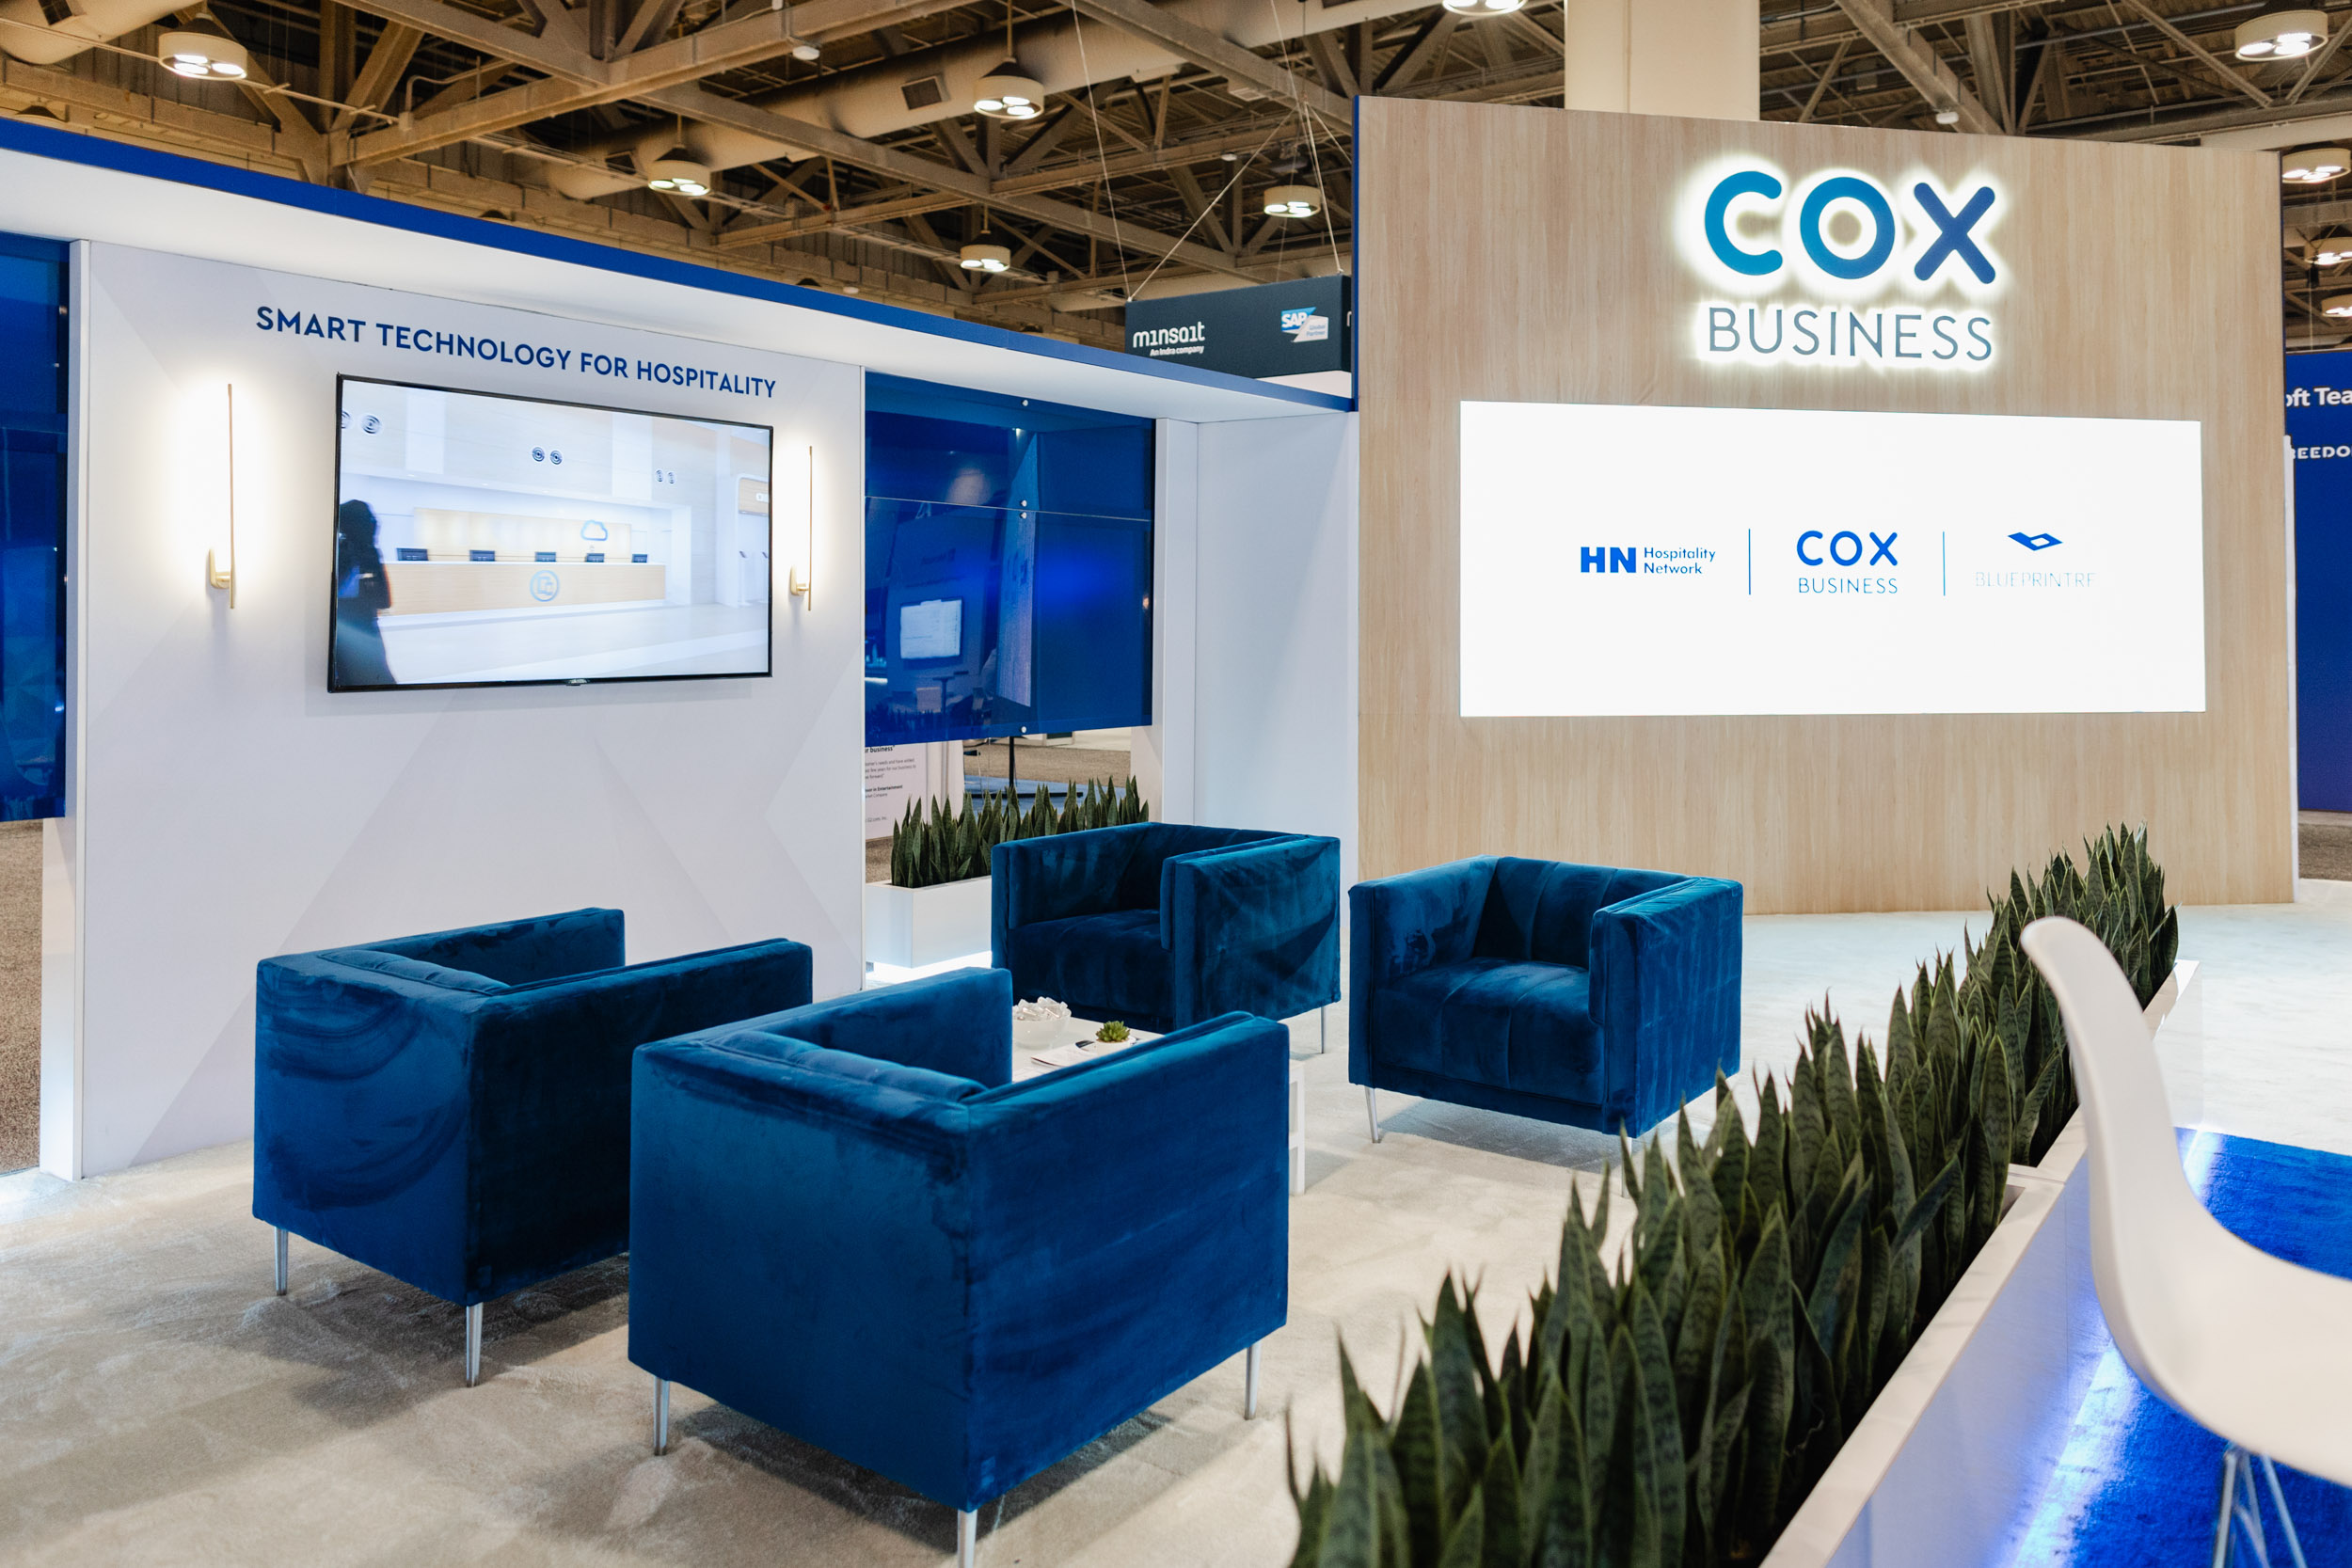 Cox business booth at the trade show expo.